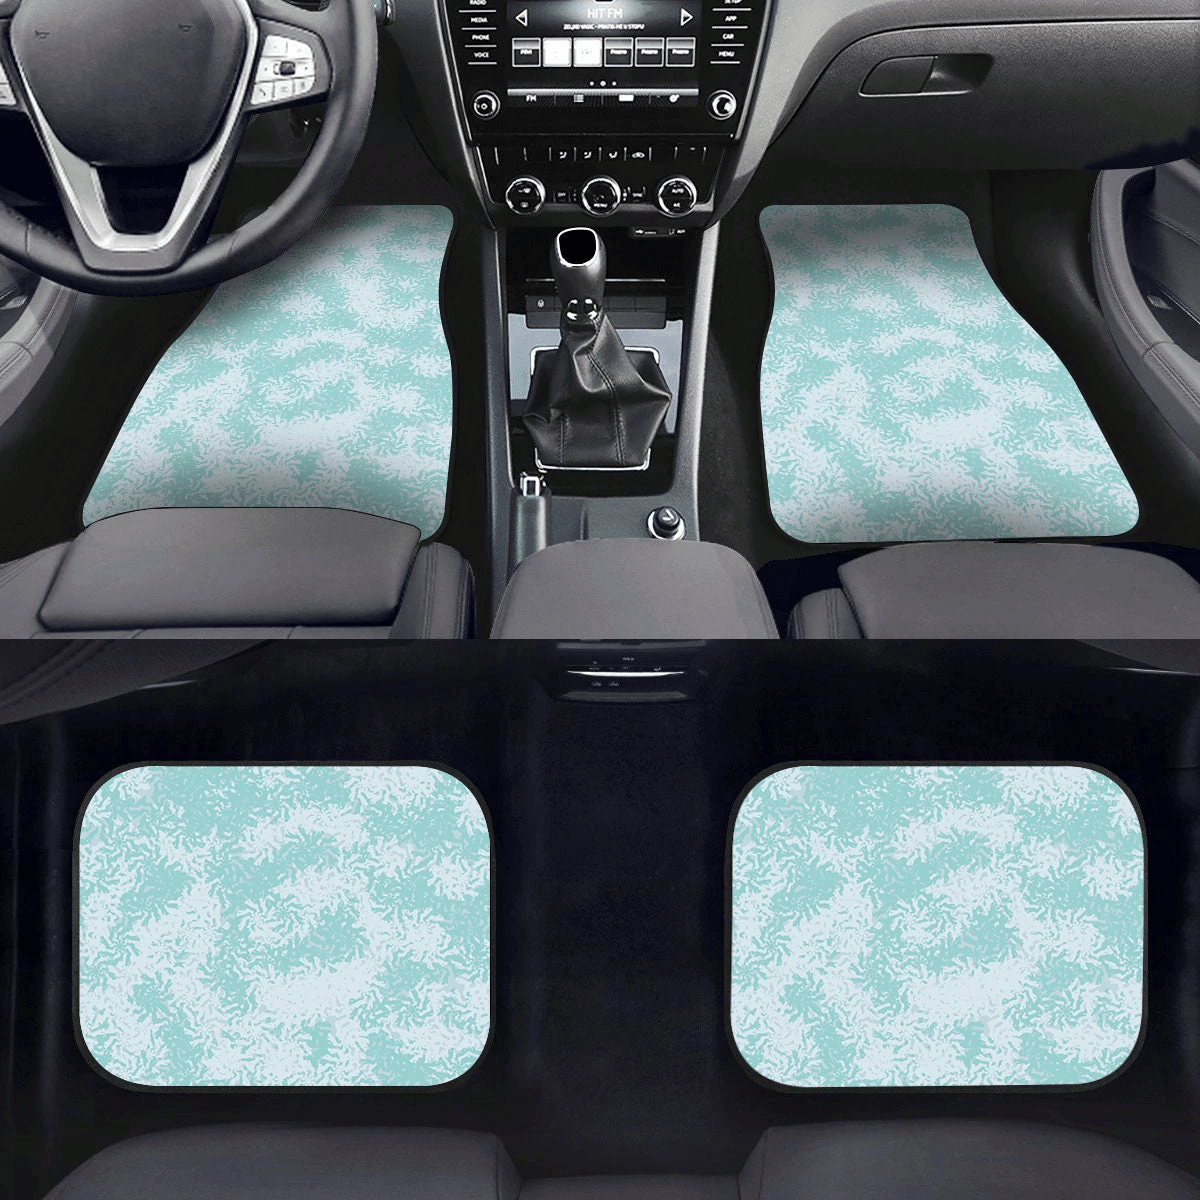 Camouflage Textures Christmas With Chaotic Snowflakes Car Mats Car Floor Mats